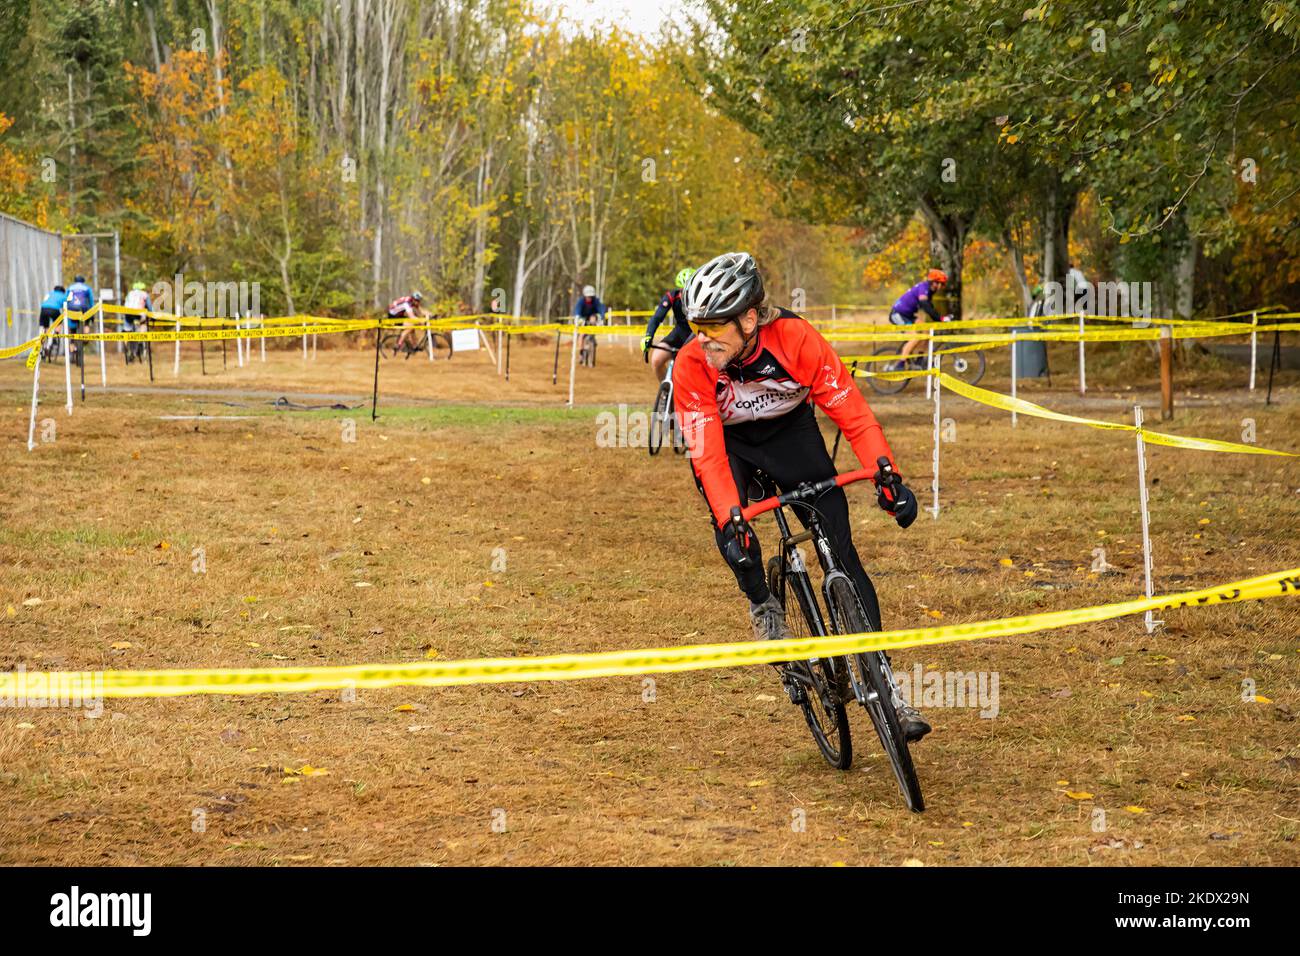 WA22733-00...WASHINGTON - Cyclist, Tom Kirkendall, riding through a series of turns during a cyclocross race at Madison Park in Seattle. Stock Photo